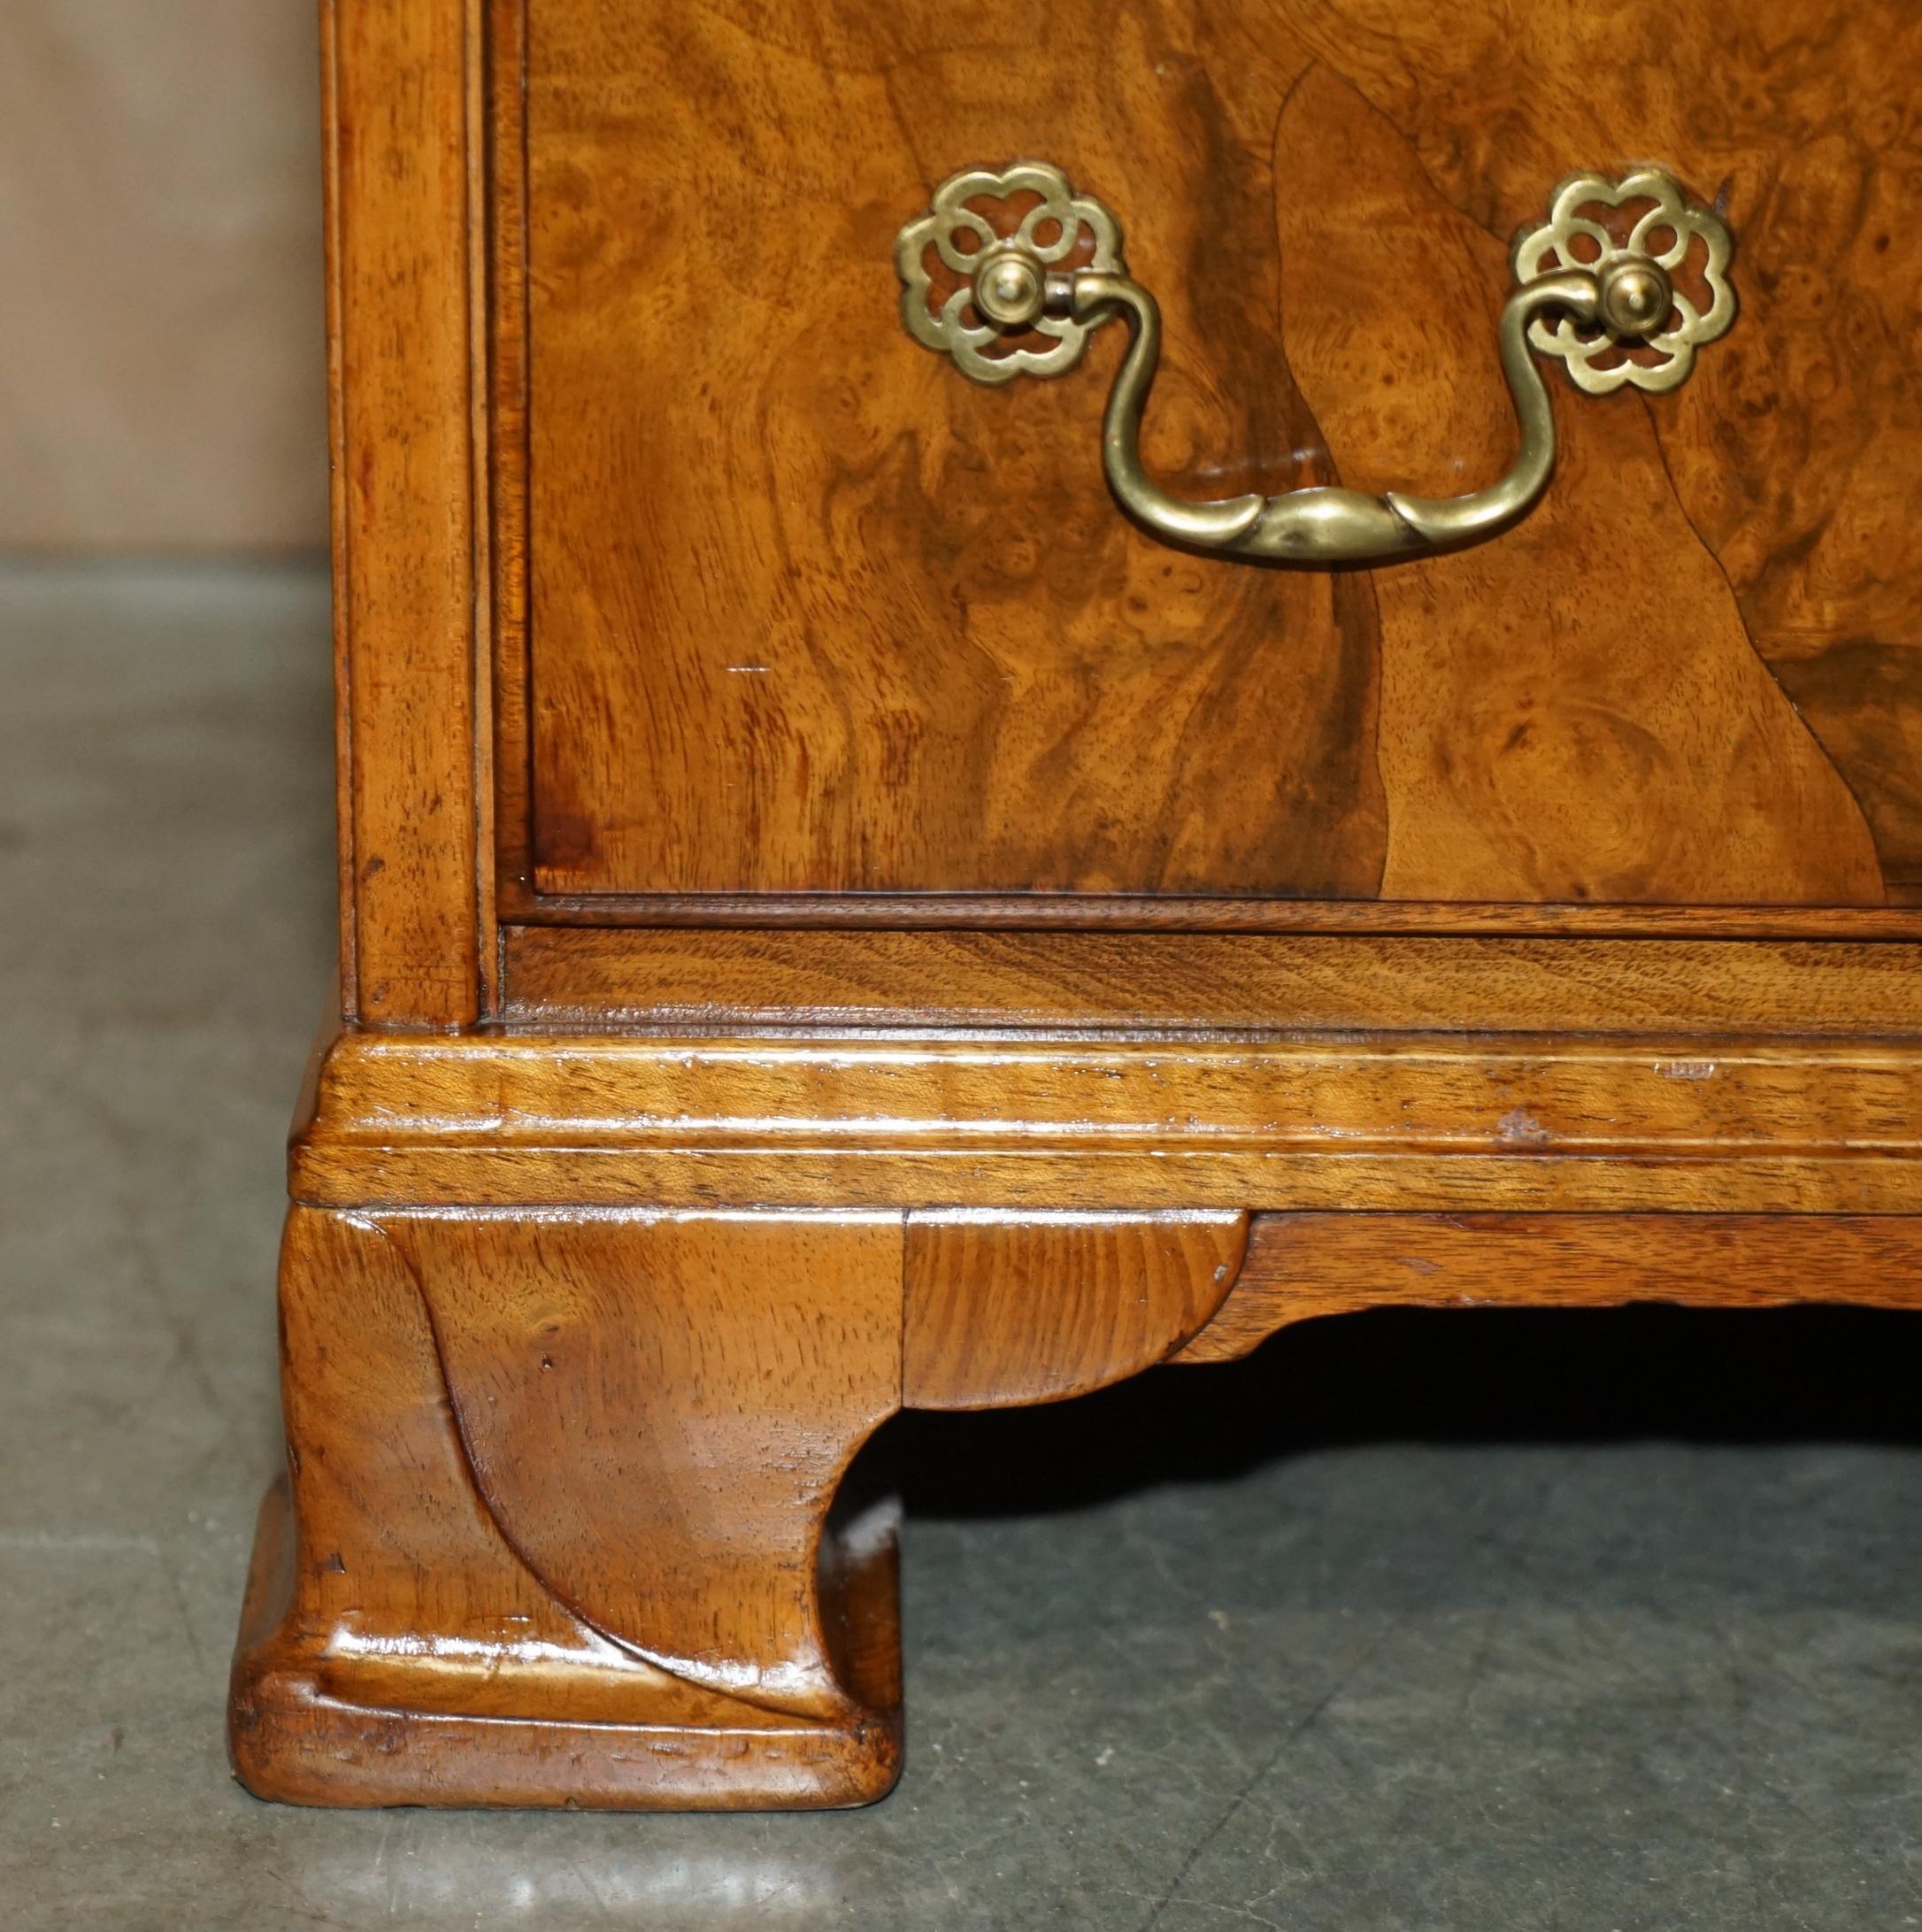 Stunning Large Sideboard Sized Bank or Chest of Drawers in Burr and Burl Walnut 1